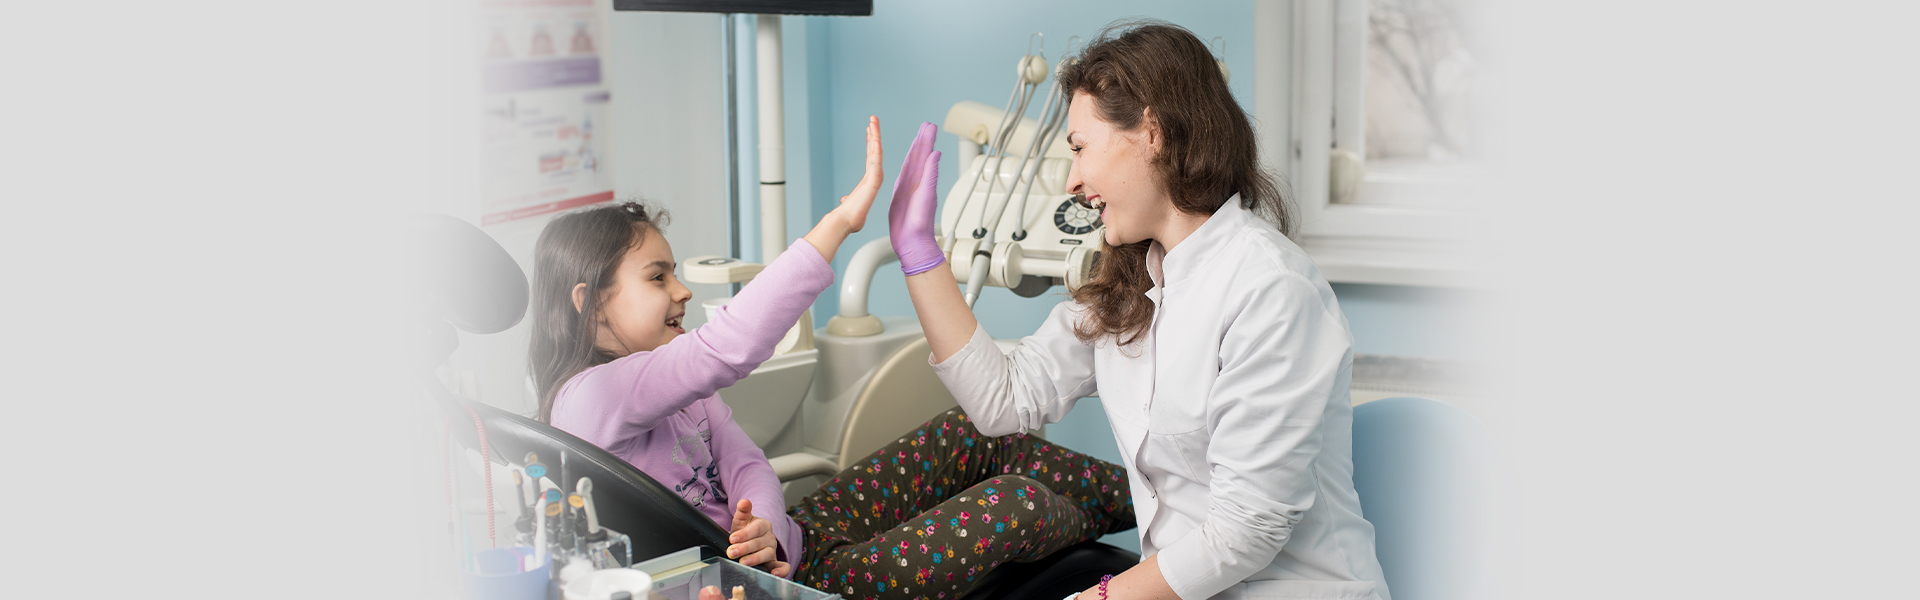 How to Make Your Child’s First Dental Visit Fun and Stress-Free?